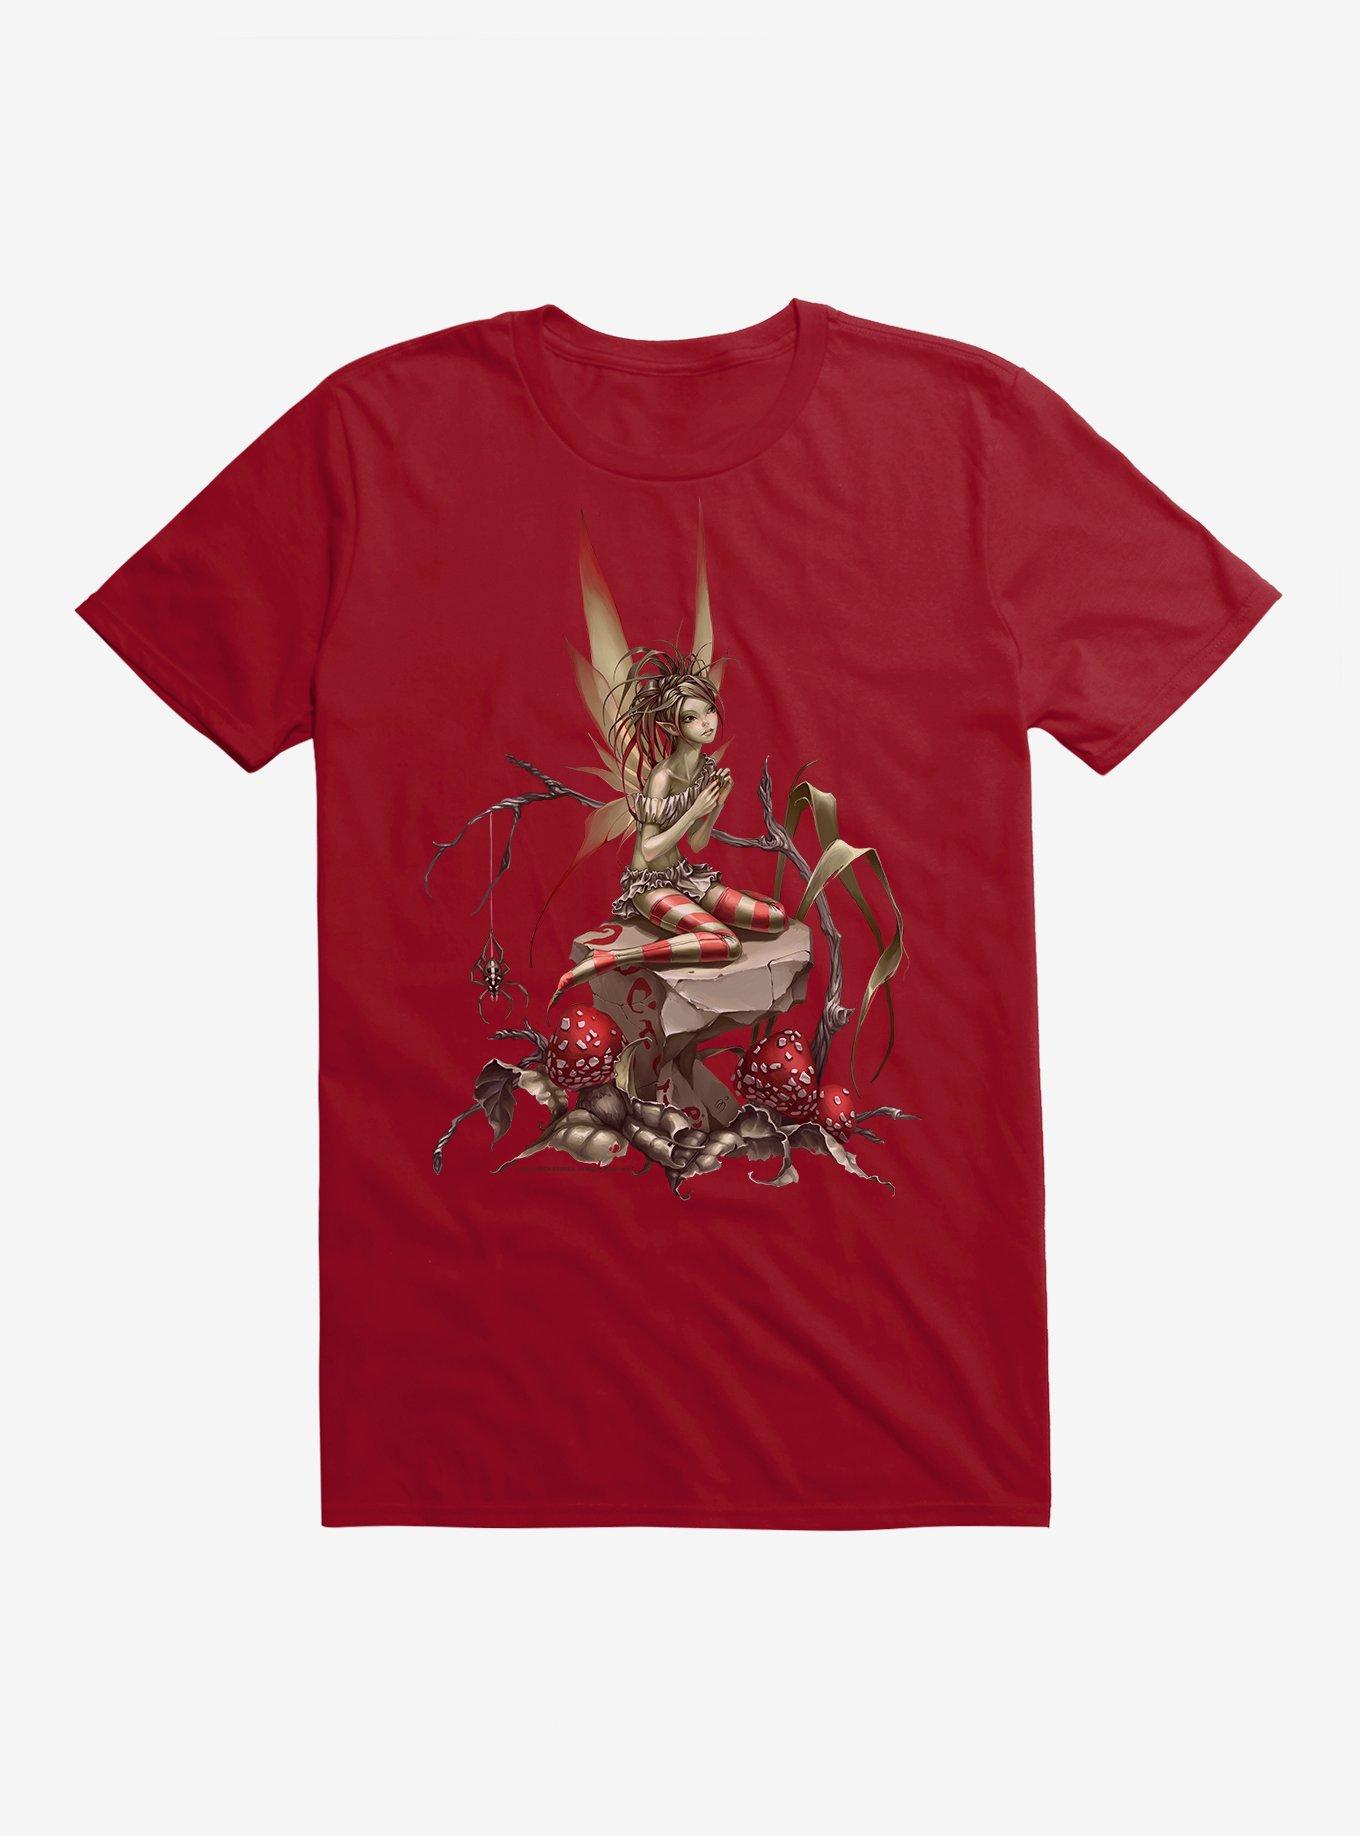 Fairies By Trick Mushroom Fairy T-Shirt, INDEPENDENCE RED, hi-res